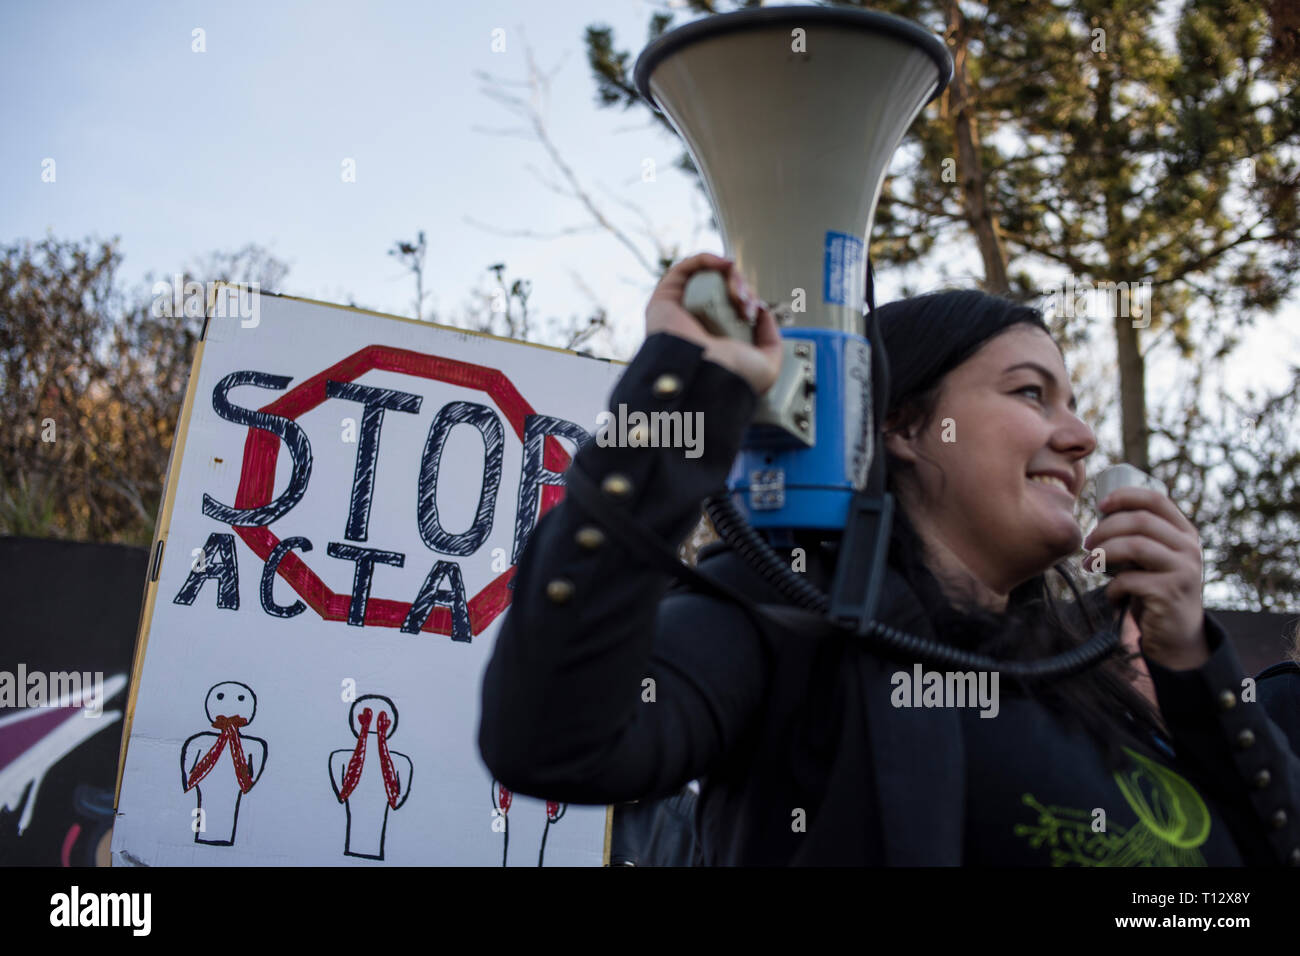 A woman is seen chanting slogans on a megaphone during the protest. Voting on the change of copyright in the European Union will take place in the last days of March. Therefore, on March 23, opponents of the controversial articles 11 and 13 intend to mobilize and take to the streets. The international Stop Acta 2.0 protest actions also took place in Warsaw and other numerous cities in Poland. Stock Photo